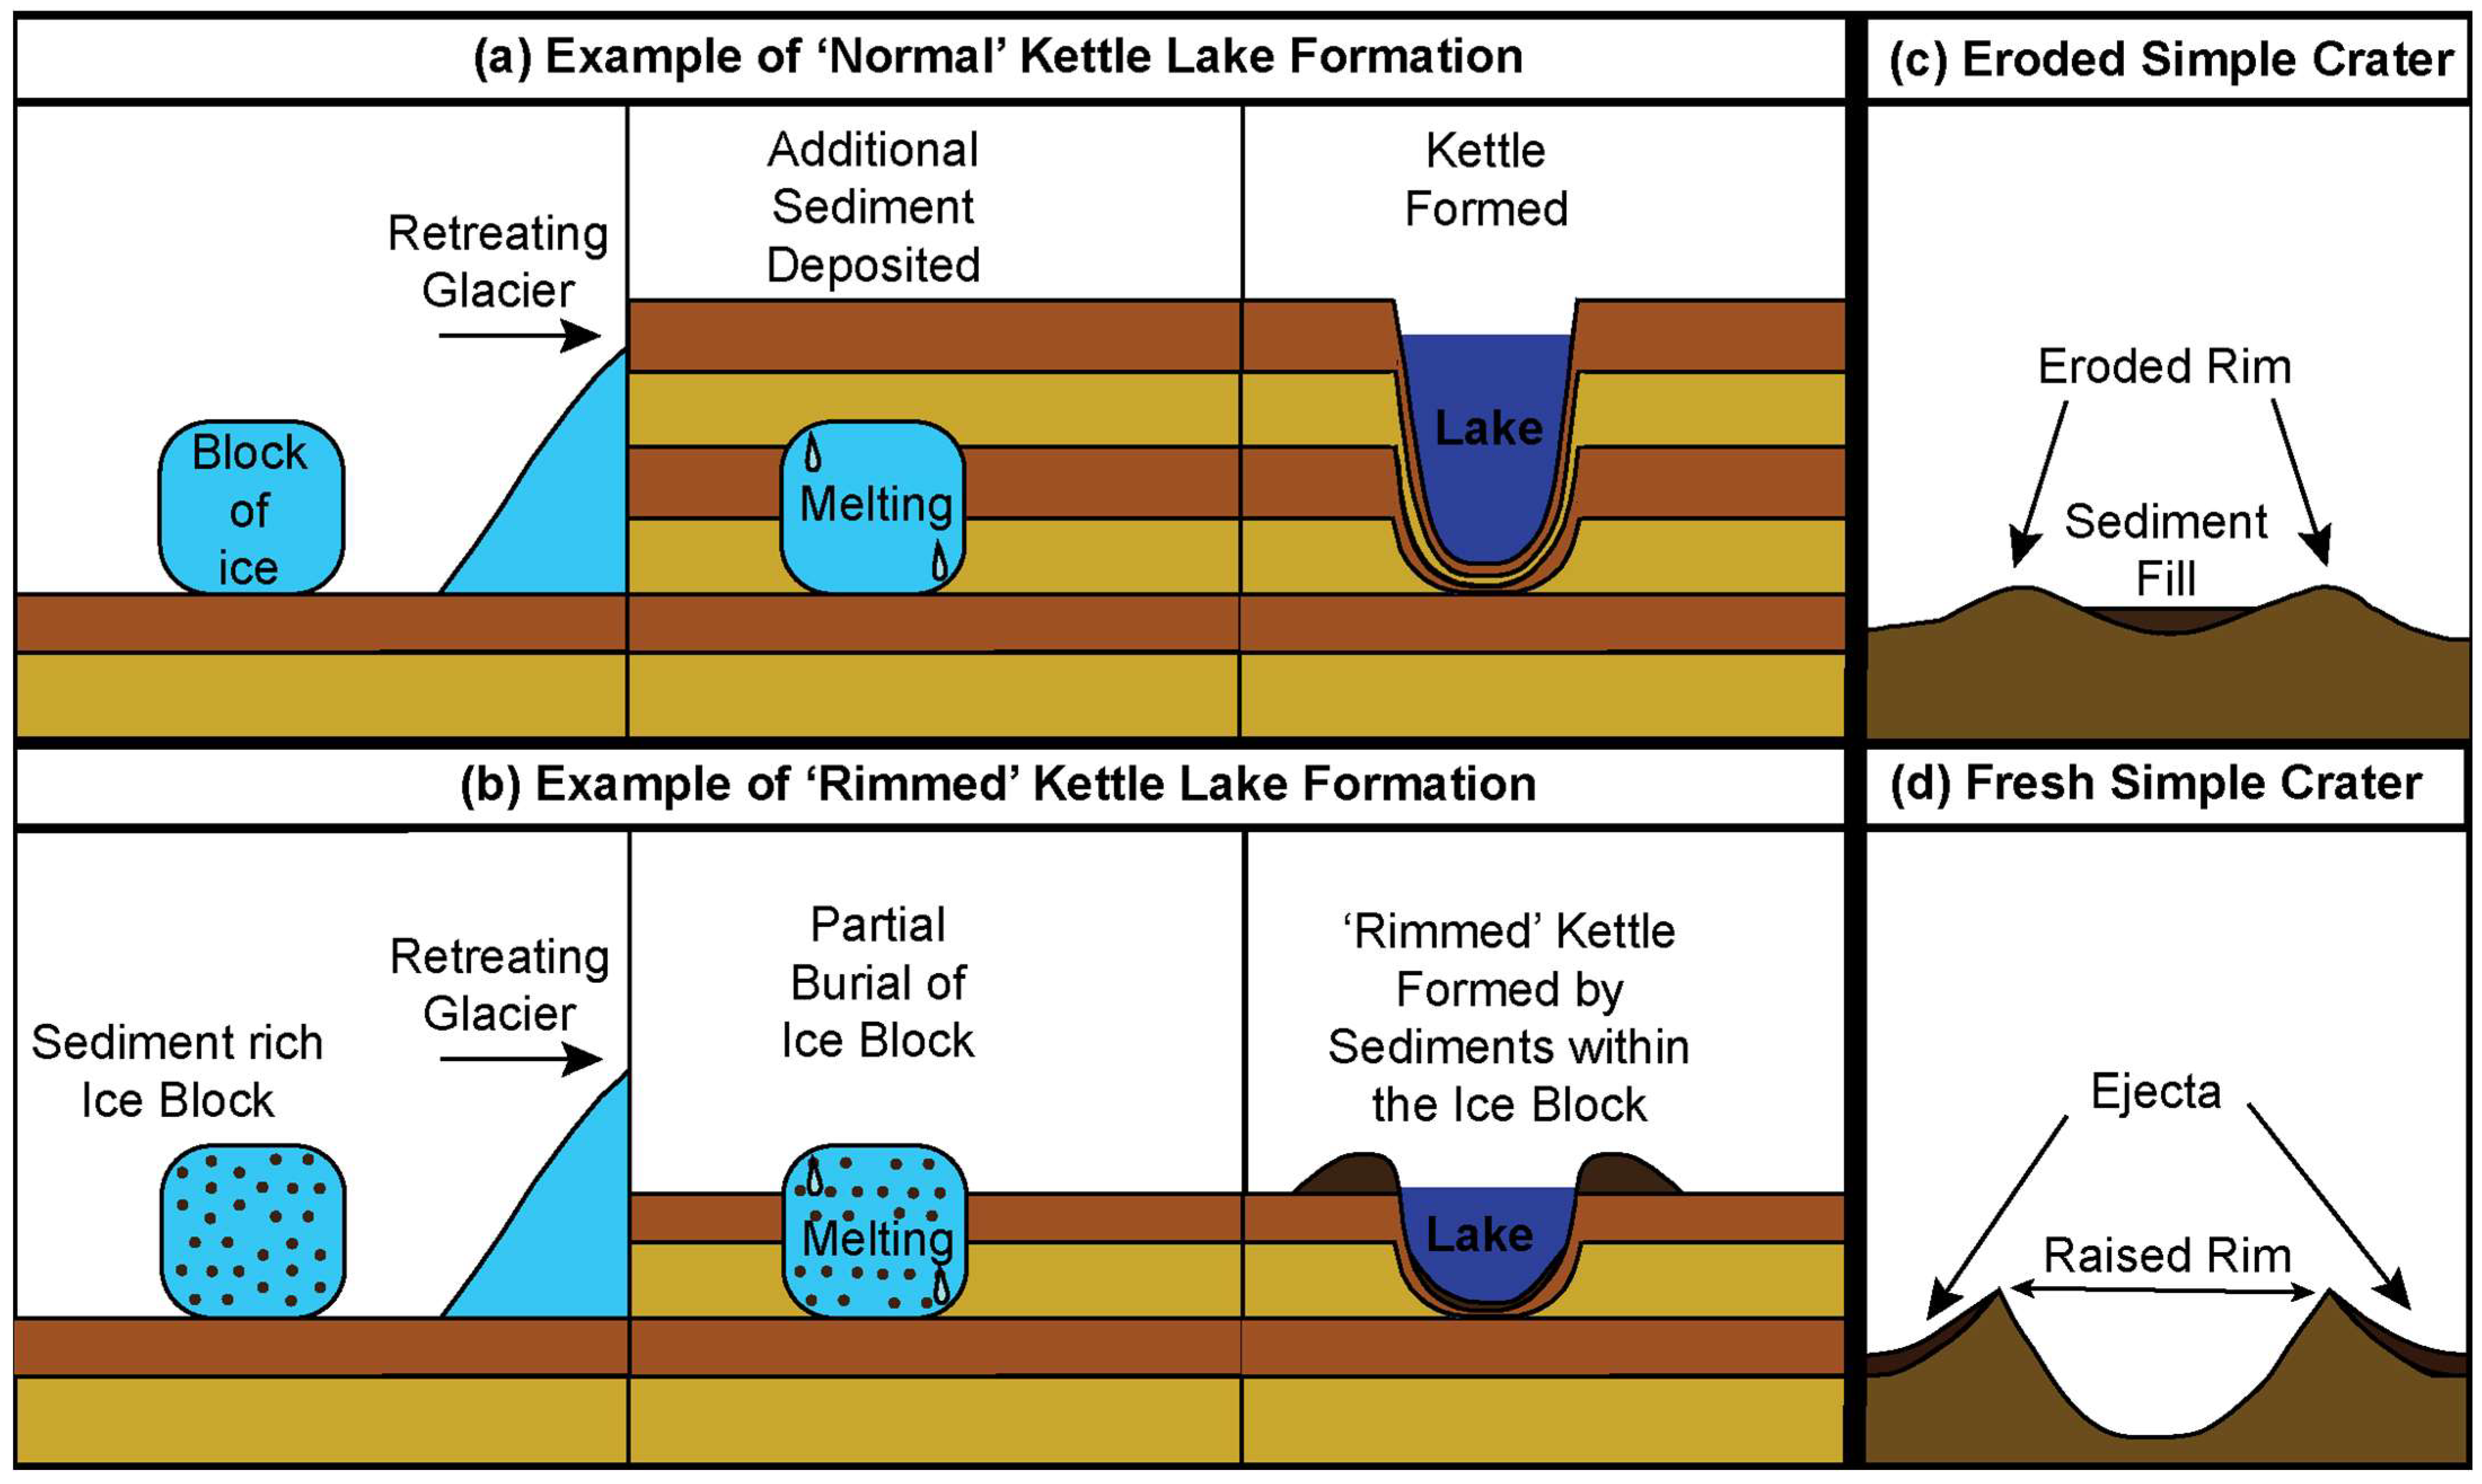 Kettled topography with water ponds in kettle holes and washboard